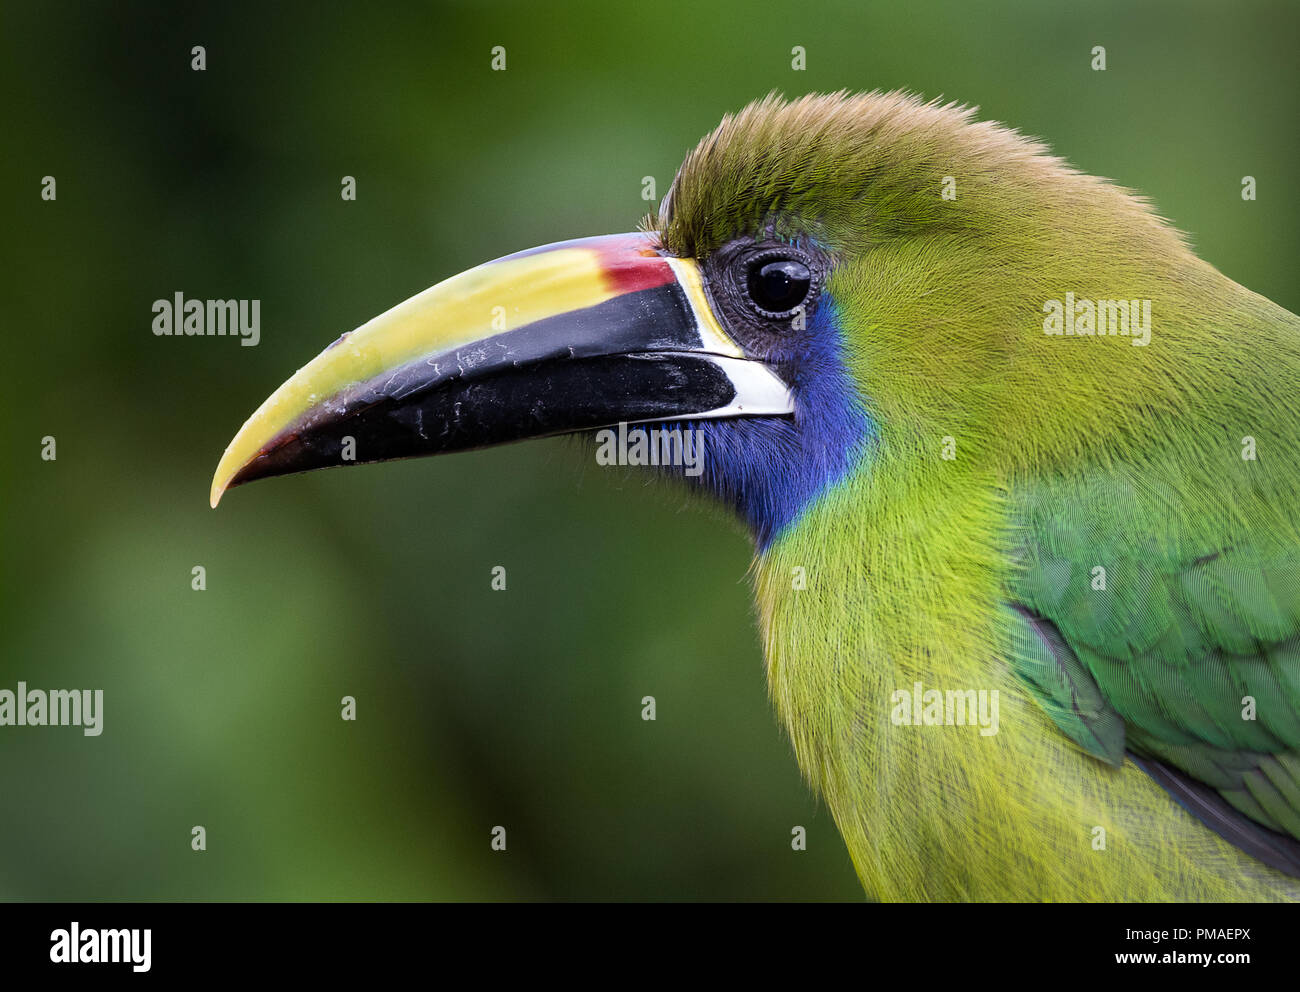 Portrait of an emerald toucanet photographed in Costa Rica Stock Photo